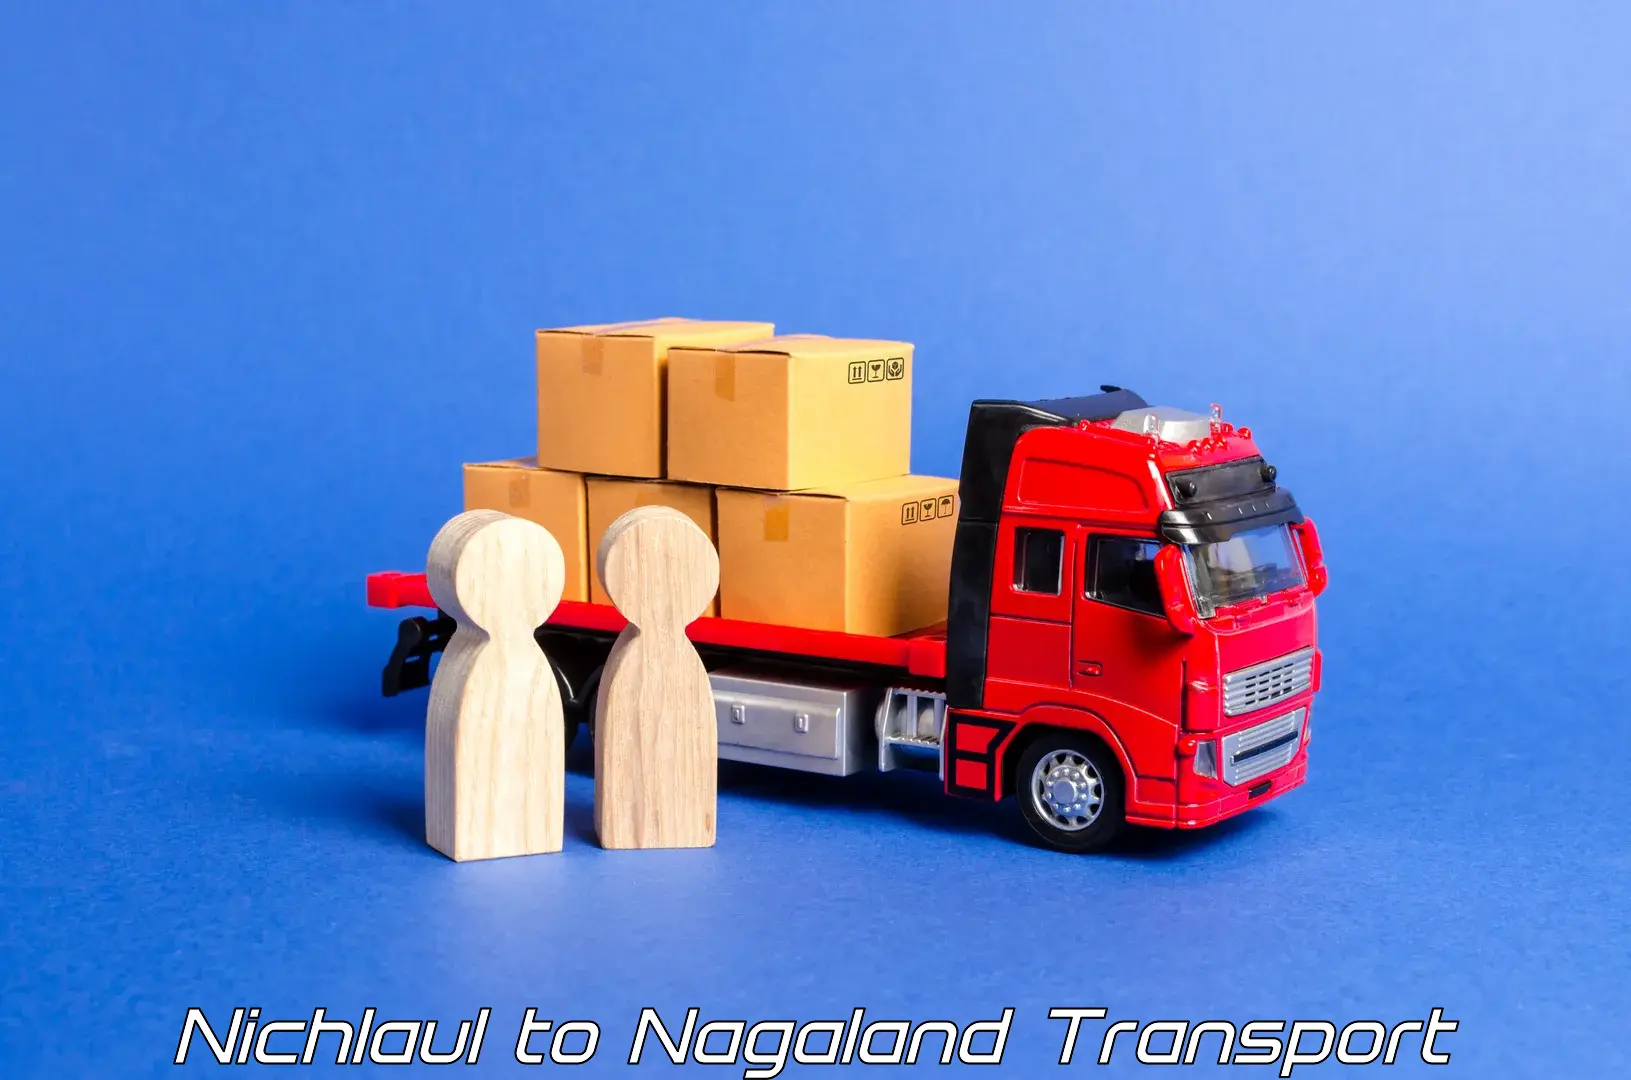 Road transport services Nichlaul to Mon